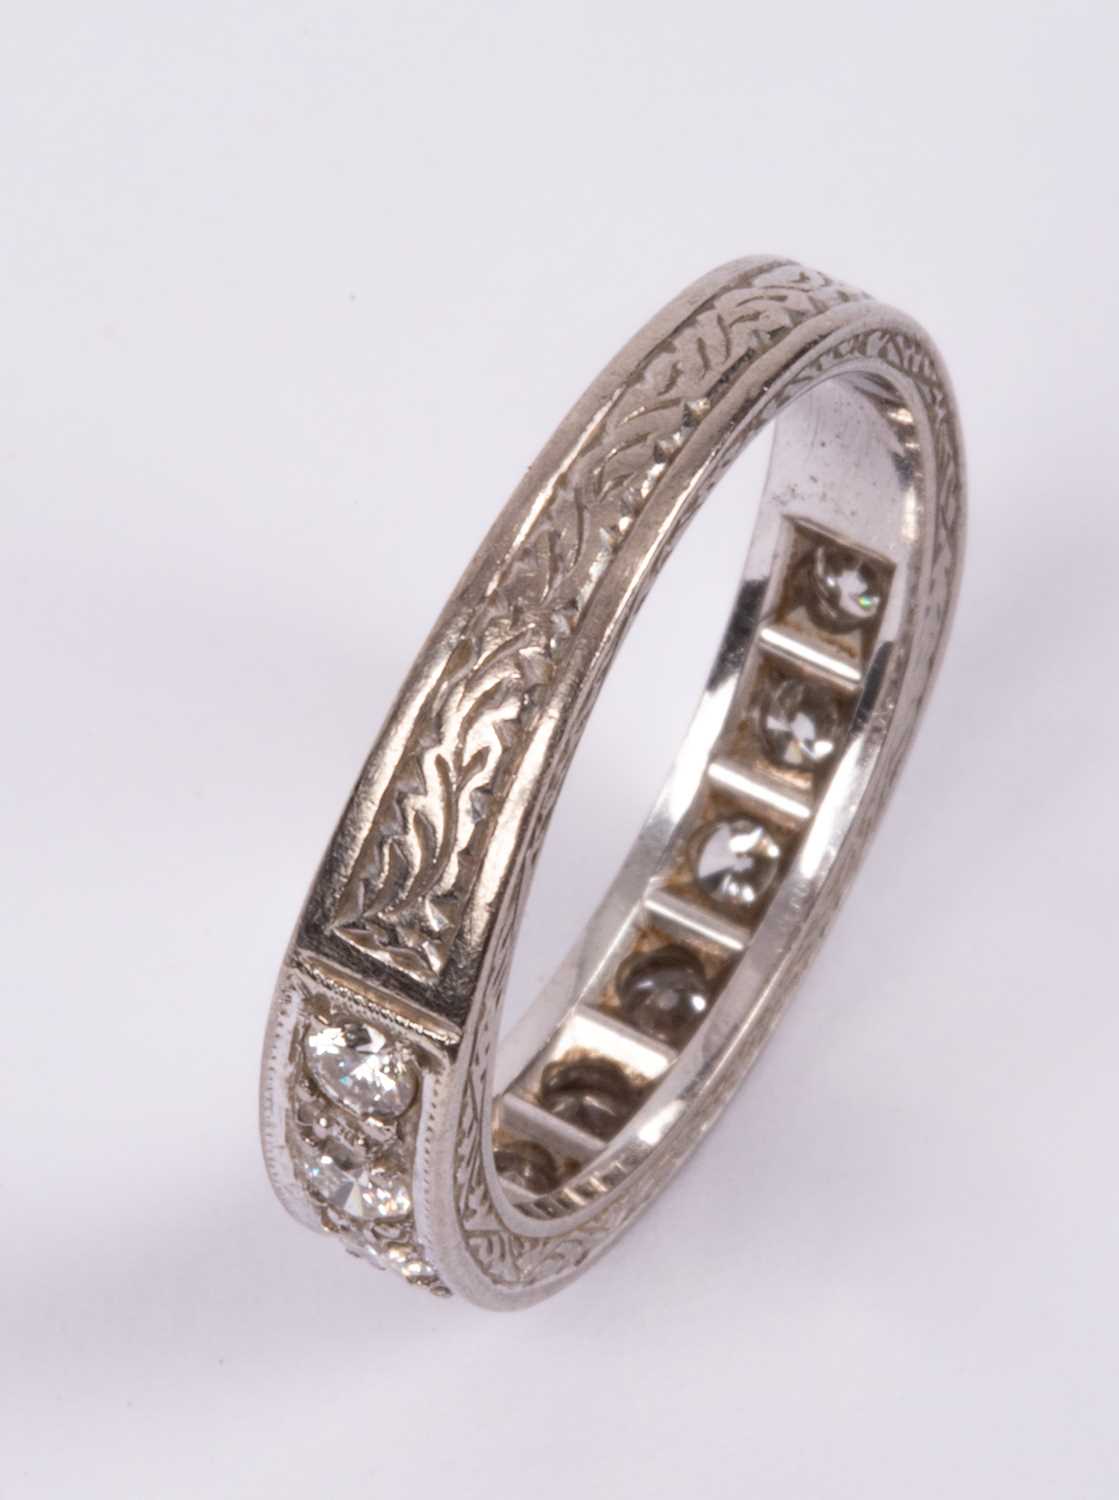 An 18ct white gold and diamond half eternity ring - Image 4 of 4